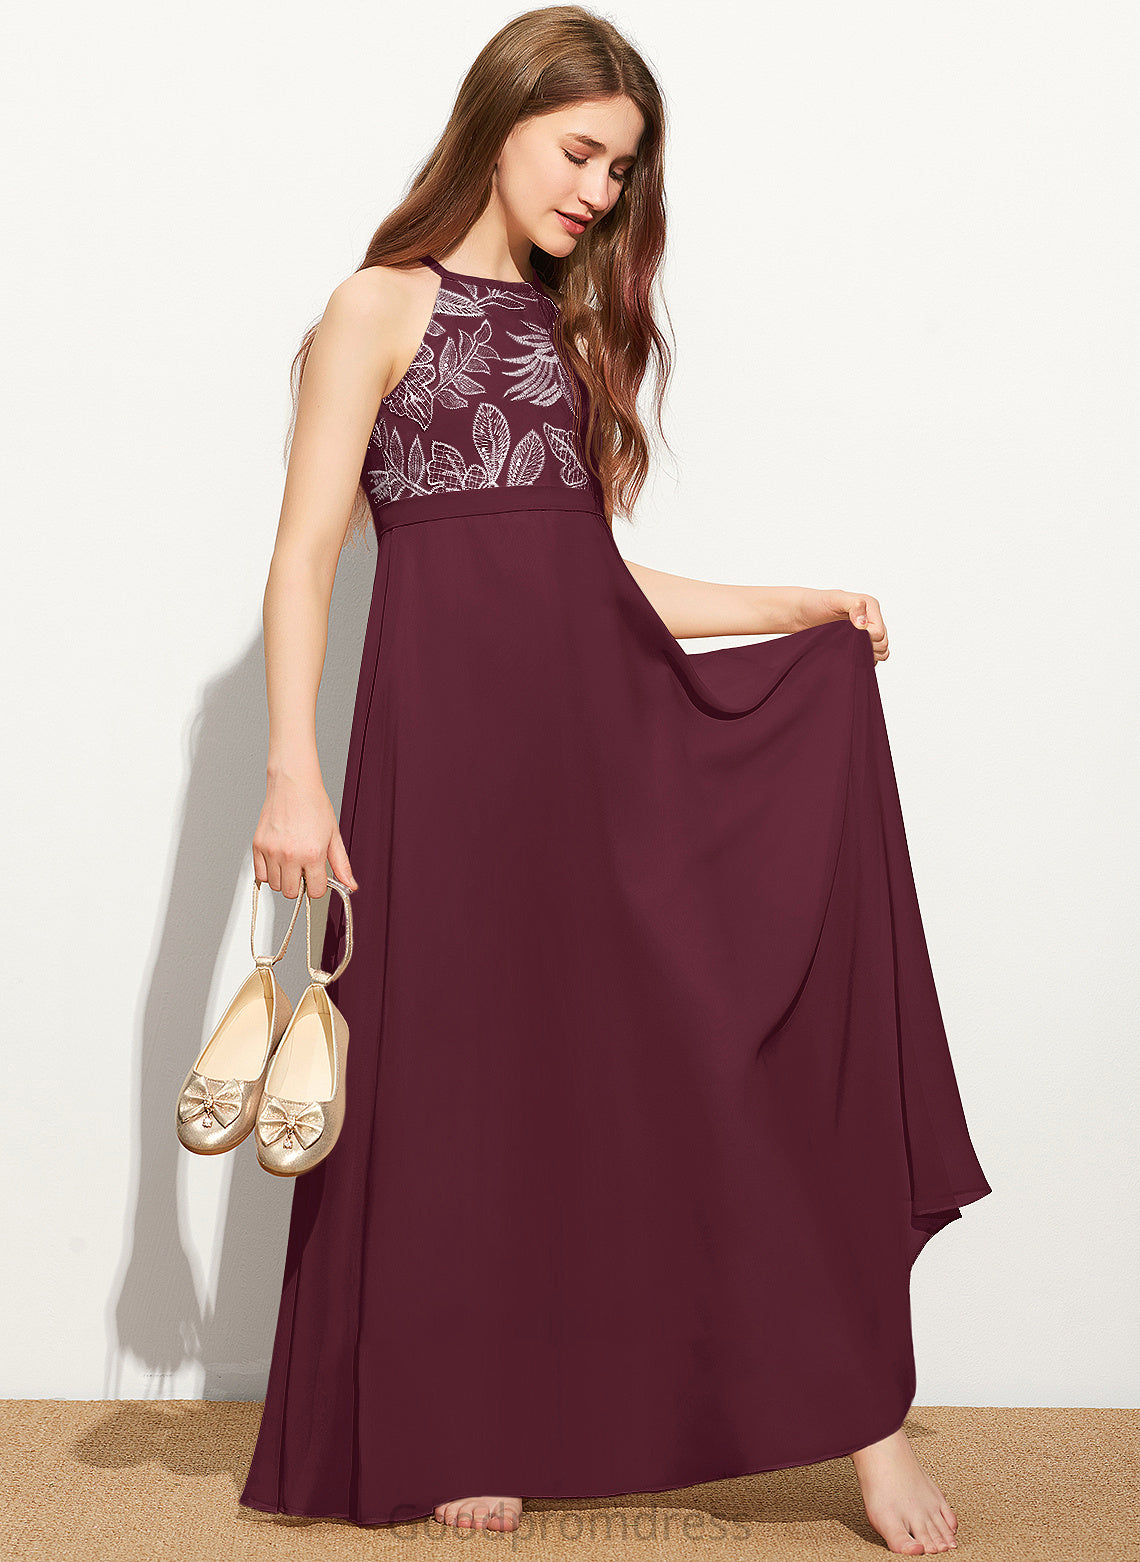 With Chiffon Lace Junior Bridesmaid Dresses A-Line Bow(s) Maeve Floor-Length Neck Scoop